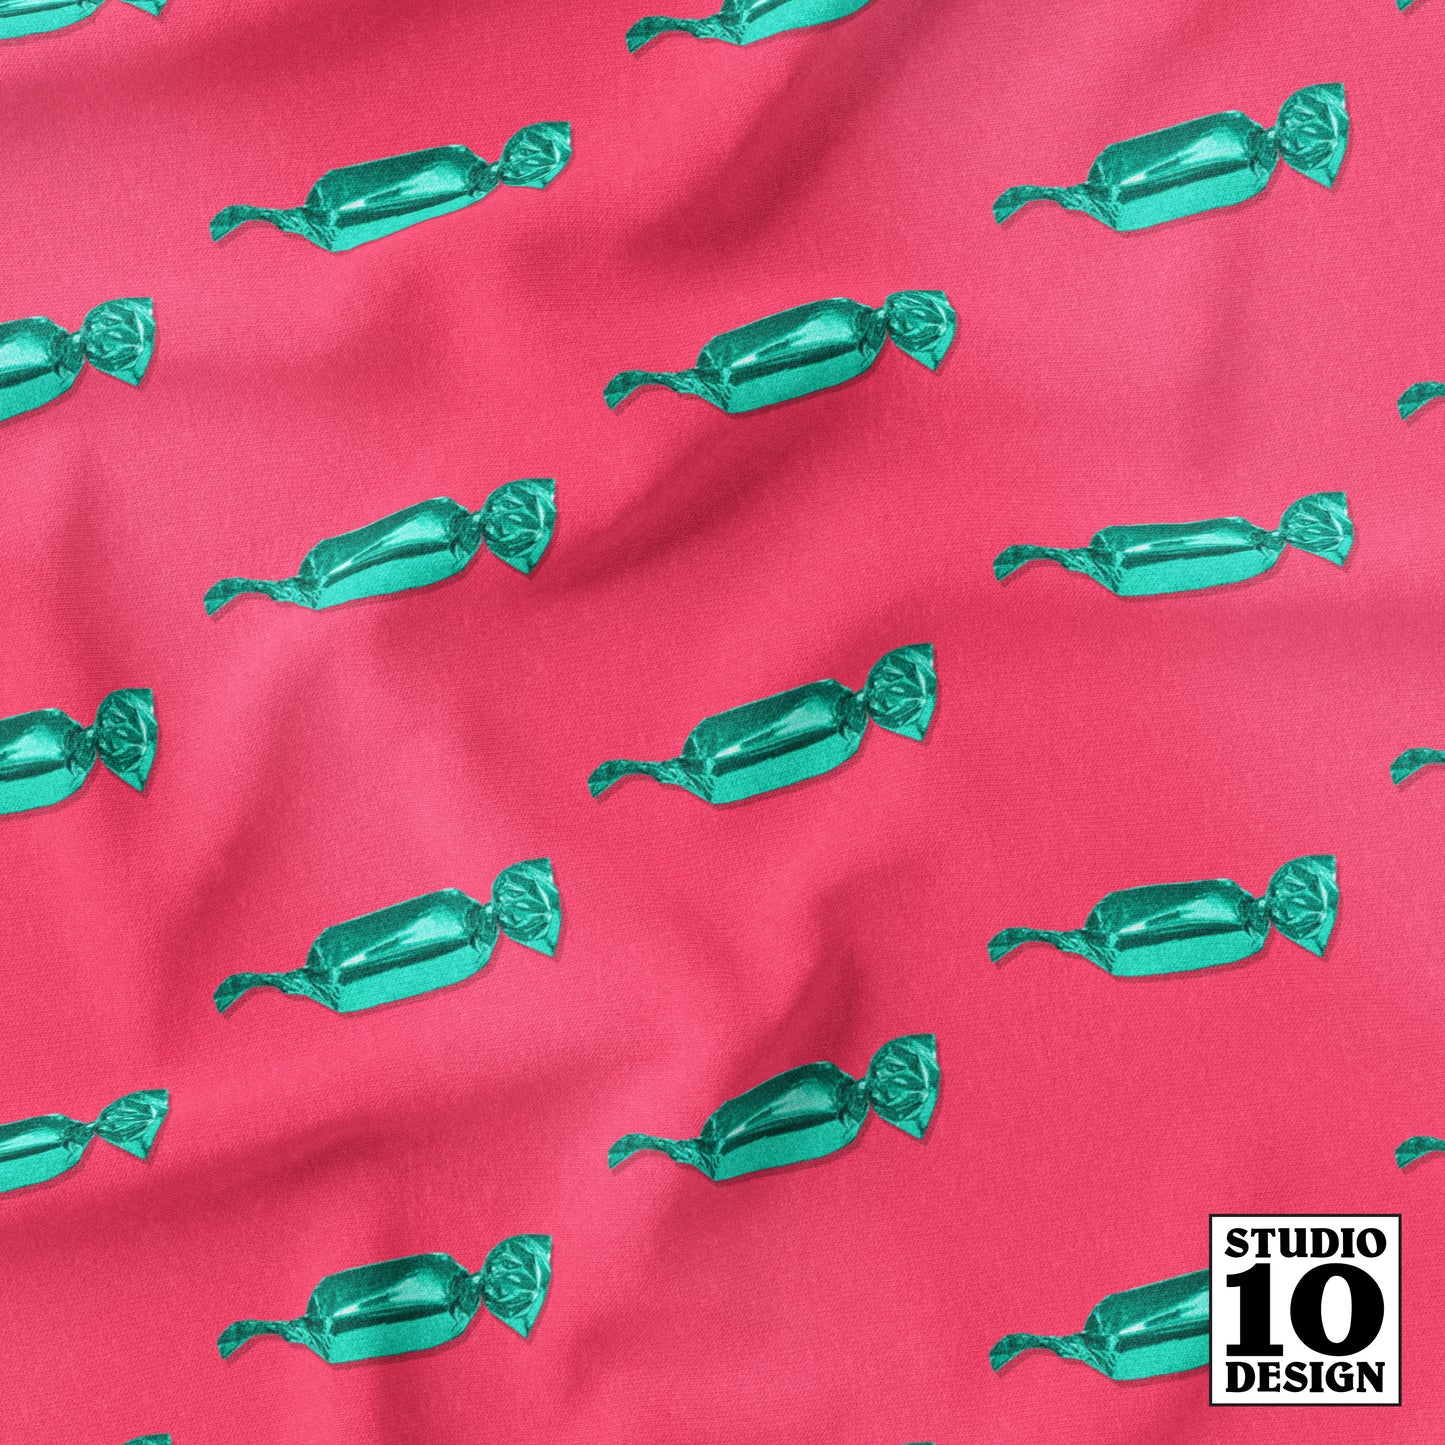 Hard Candy, Green & Pink Printed Fabric by Studio Ten Design